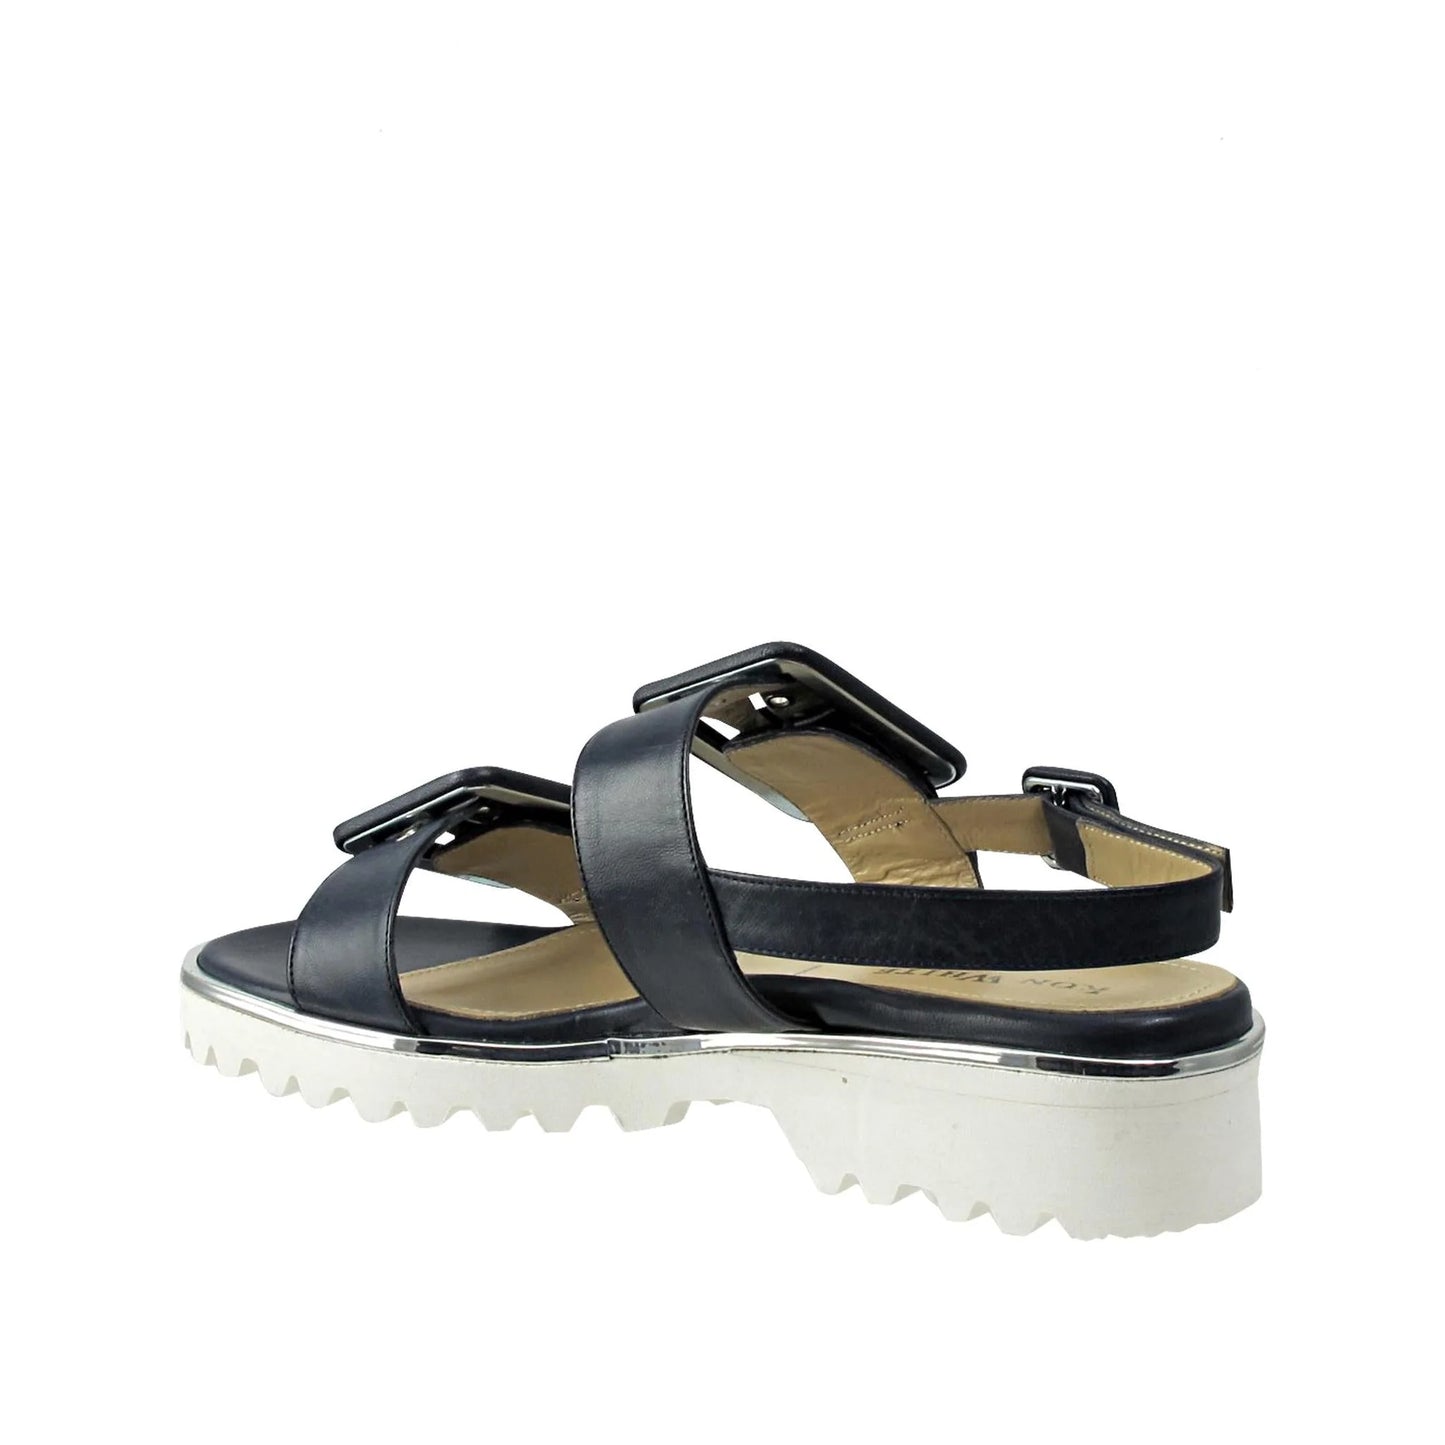 RON WHITE CALLIE SANDLE IN FRENCH NAVY